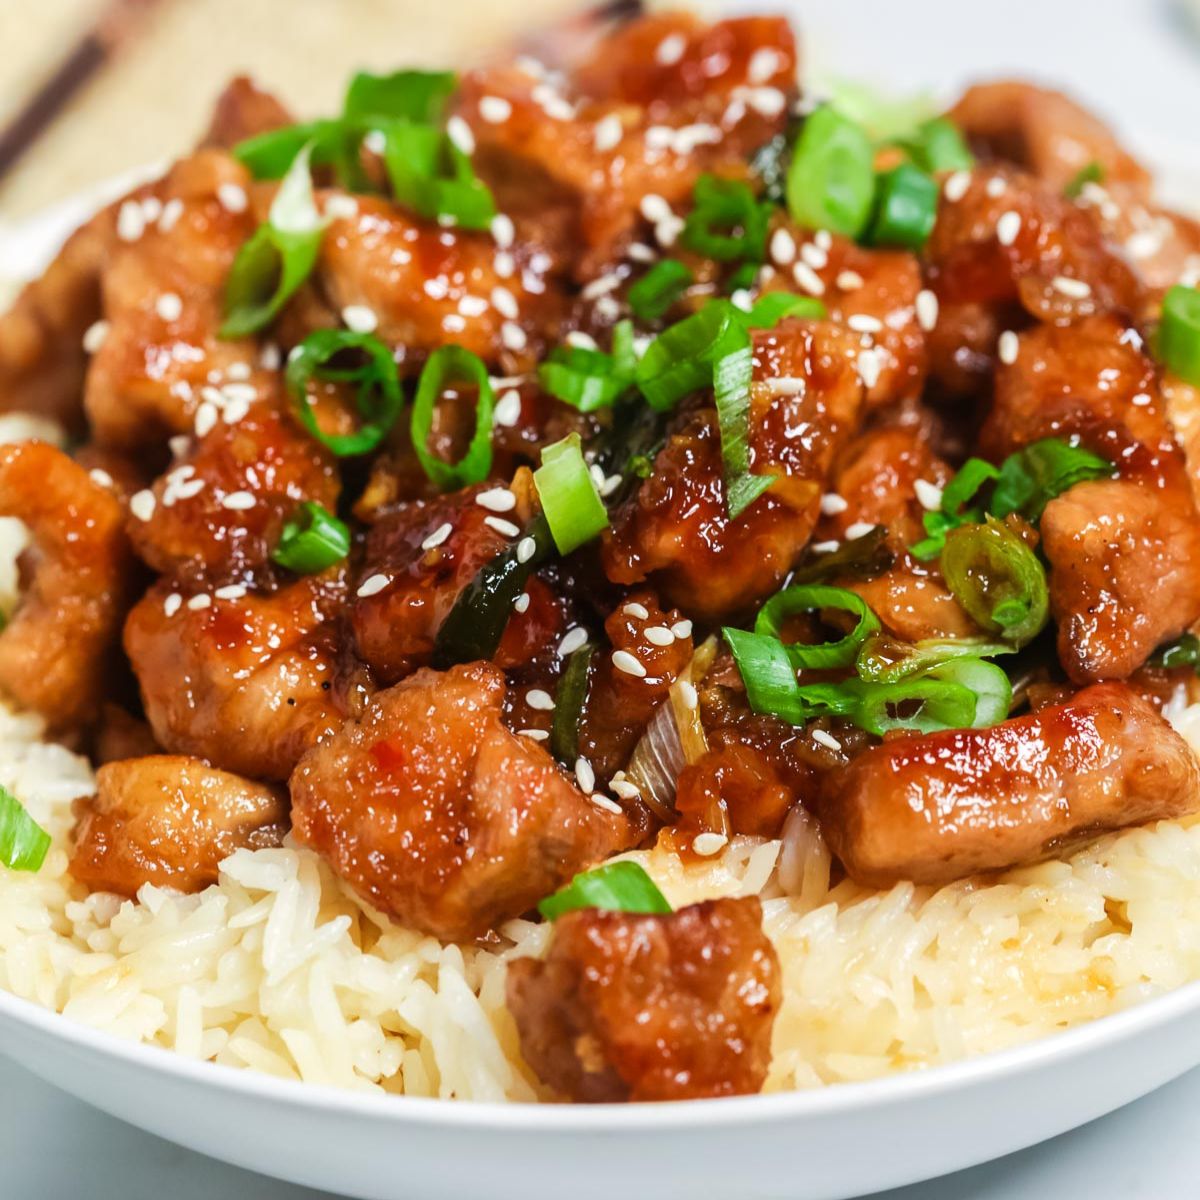 A close-up from our recipe index: teriyaki chicken over rice, garnished with sesame seeds and chopped green onions.